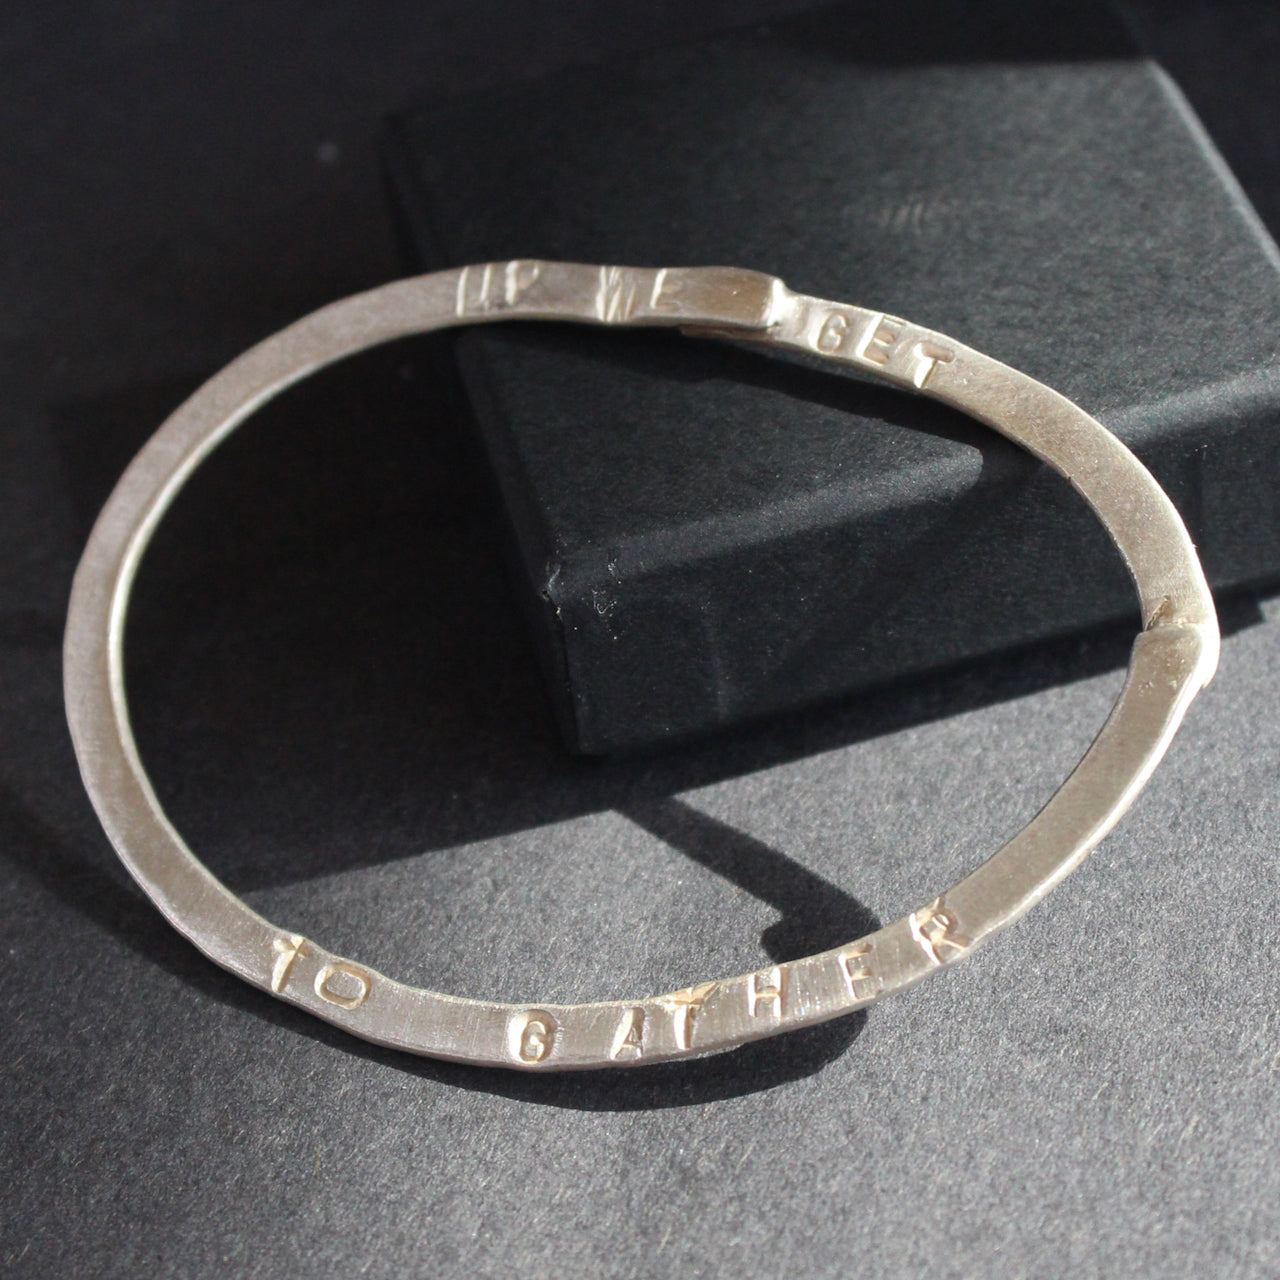 silver bangle with the words up we get to gather embossed on it by jeweller Lizzie Weir of Anatole Design